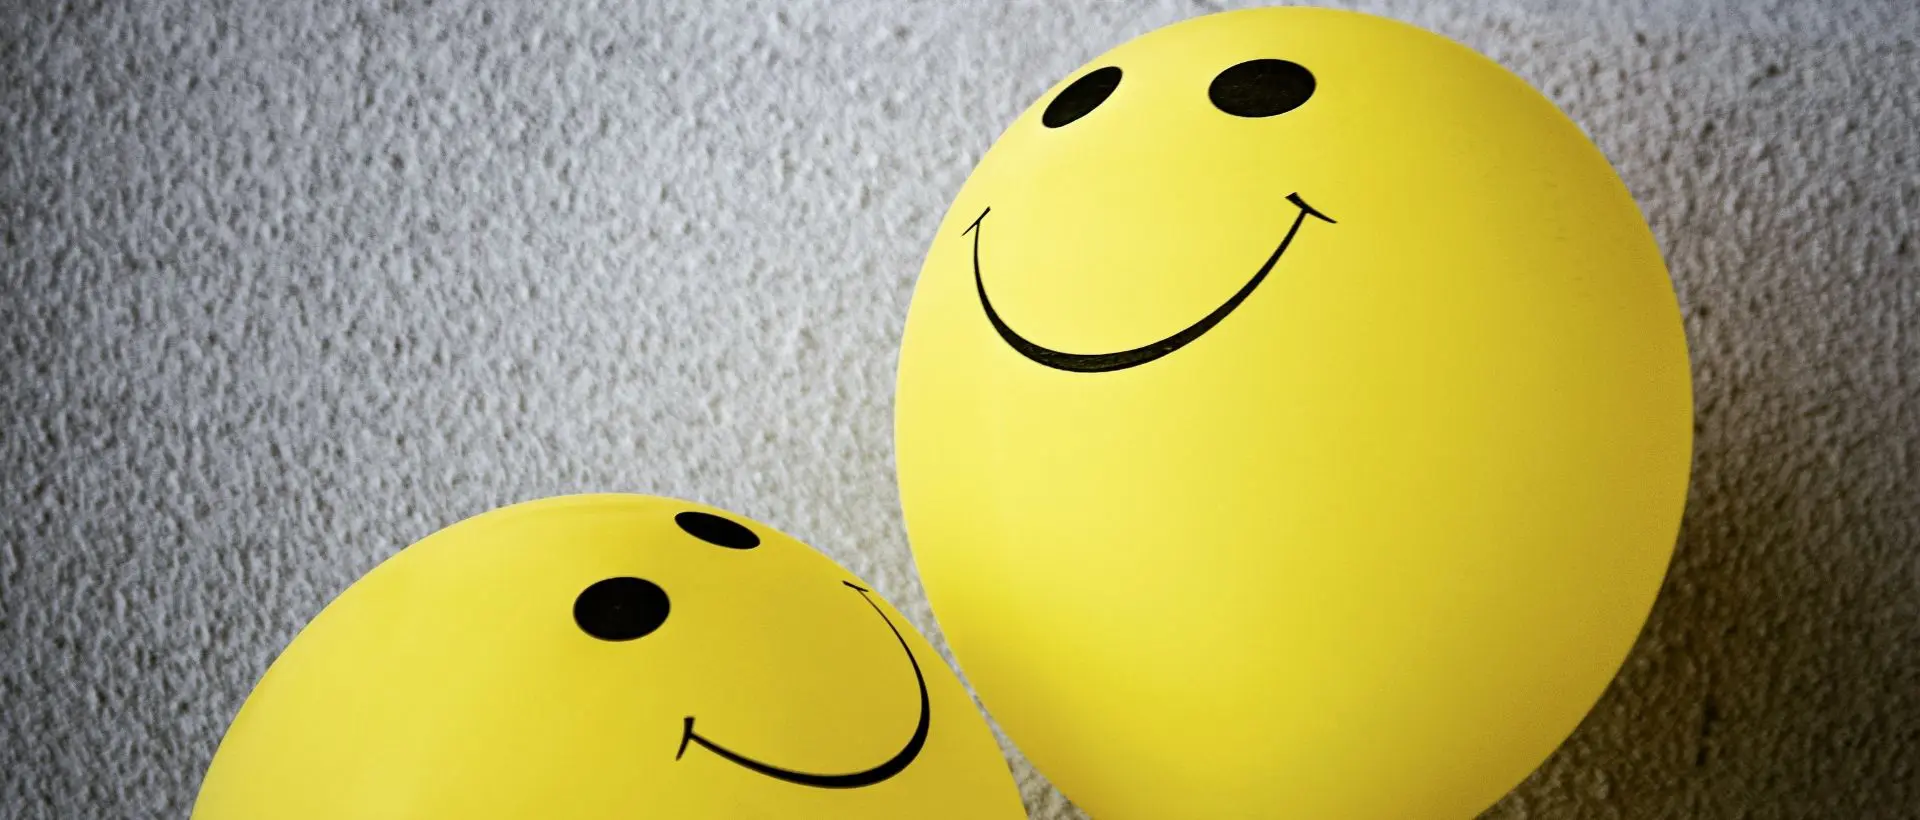 two yellow balloons with faces drawn on them.